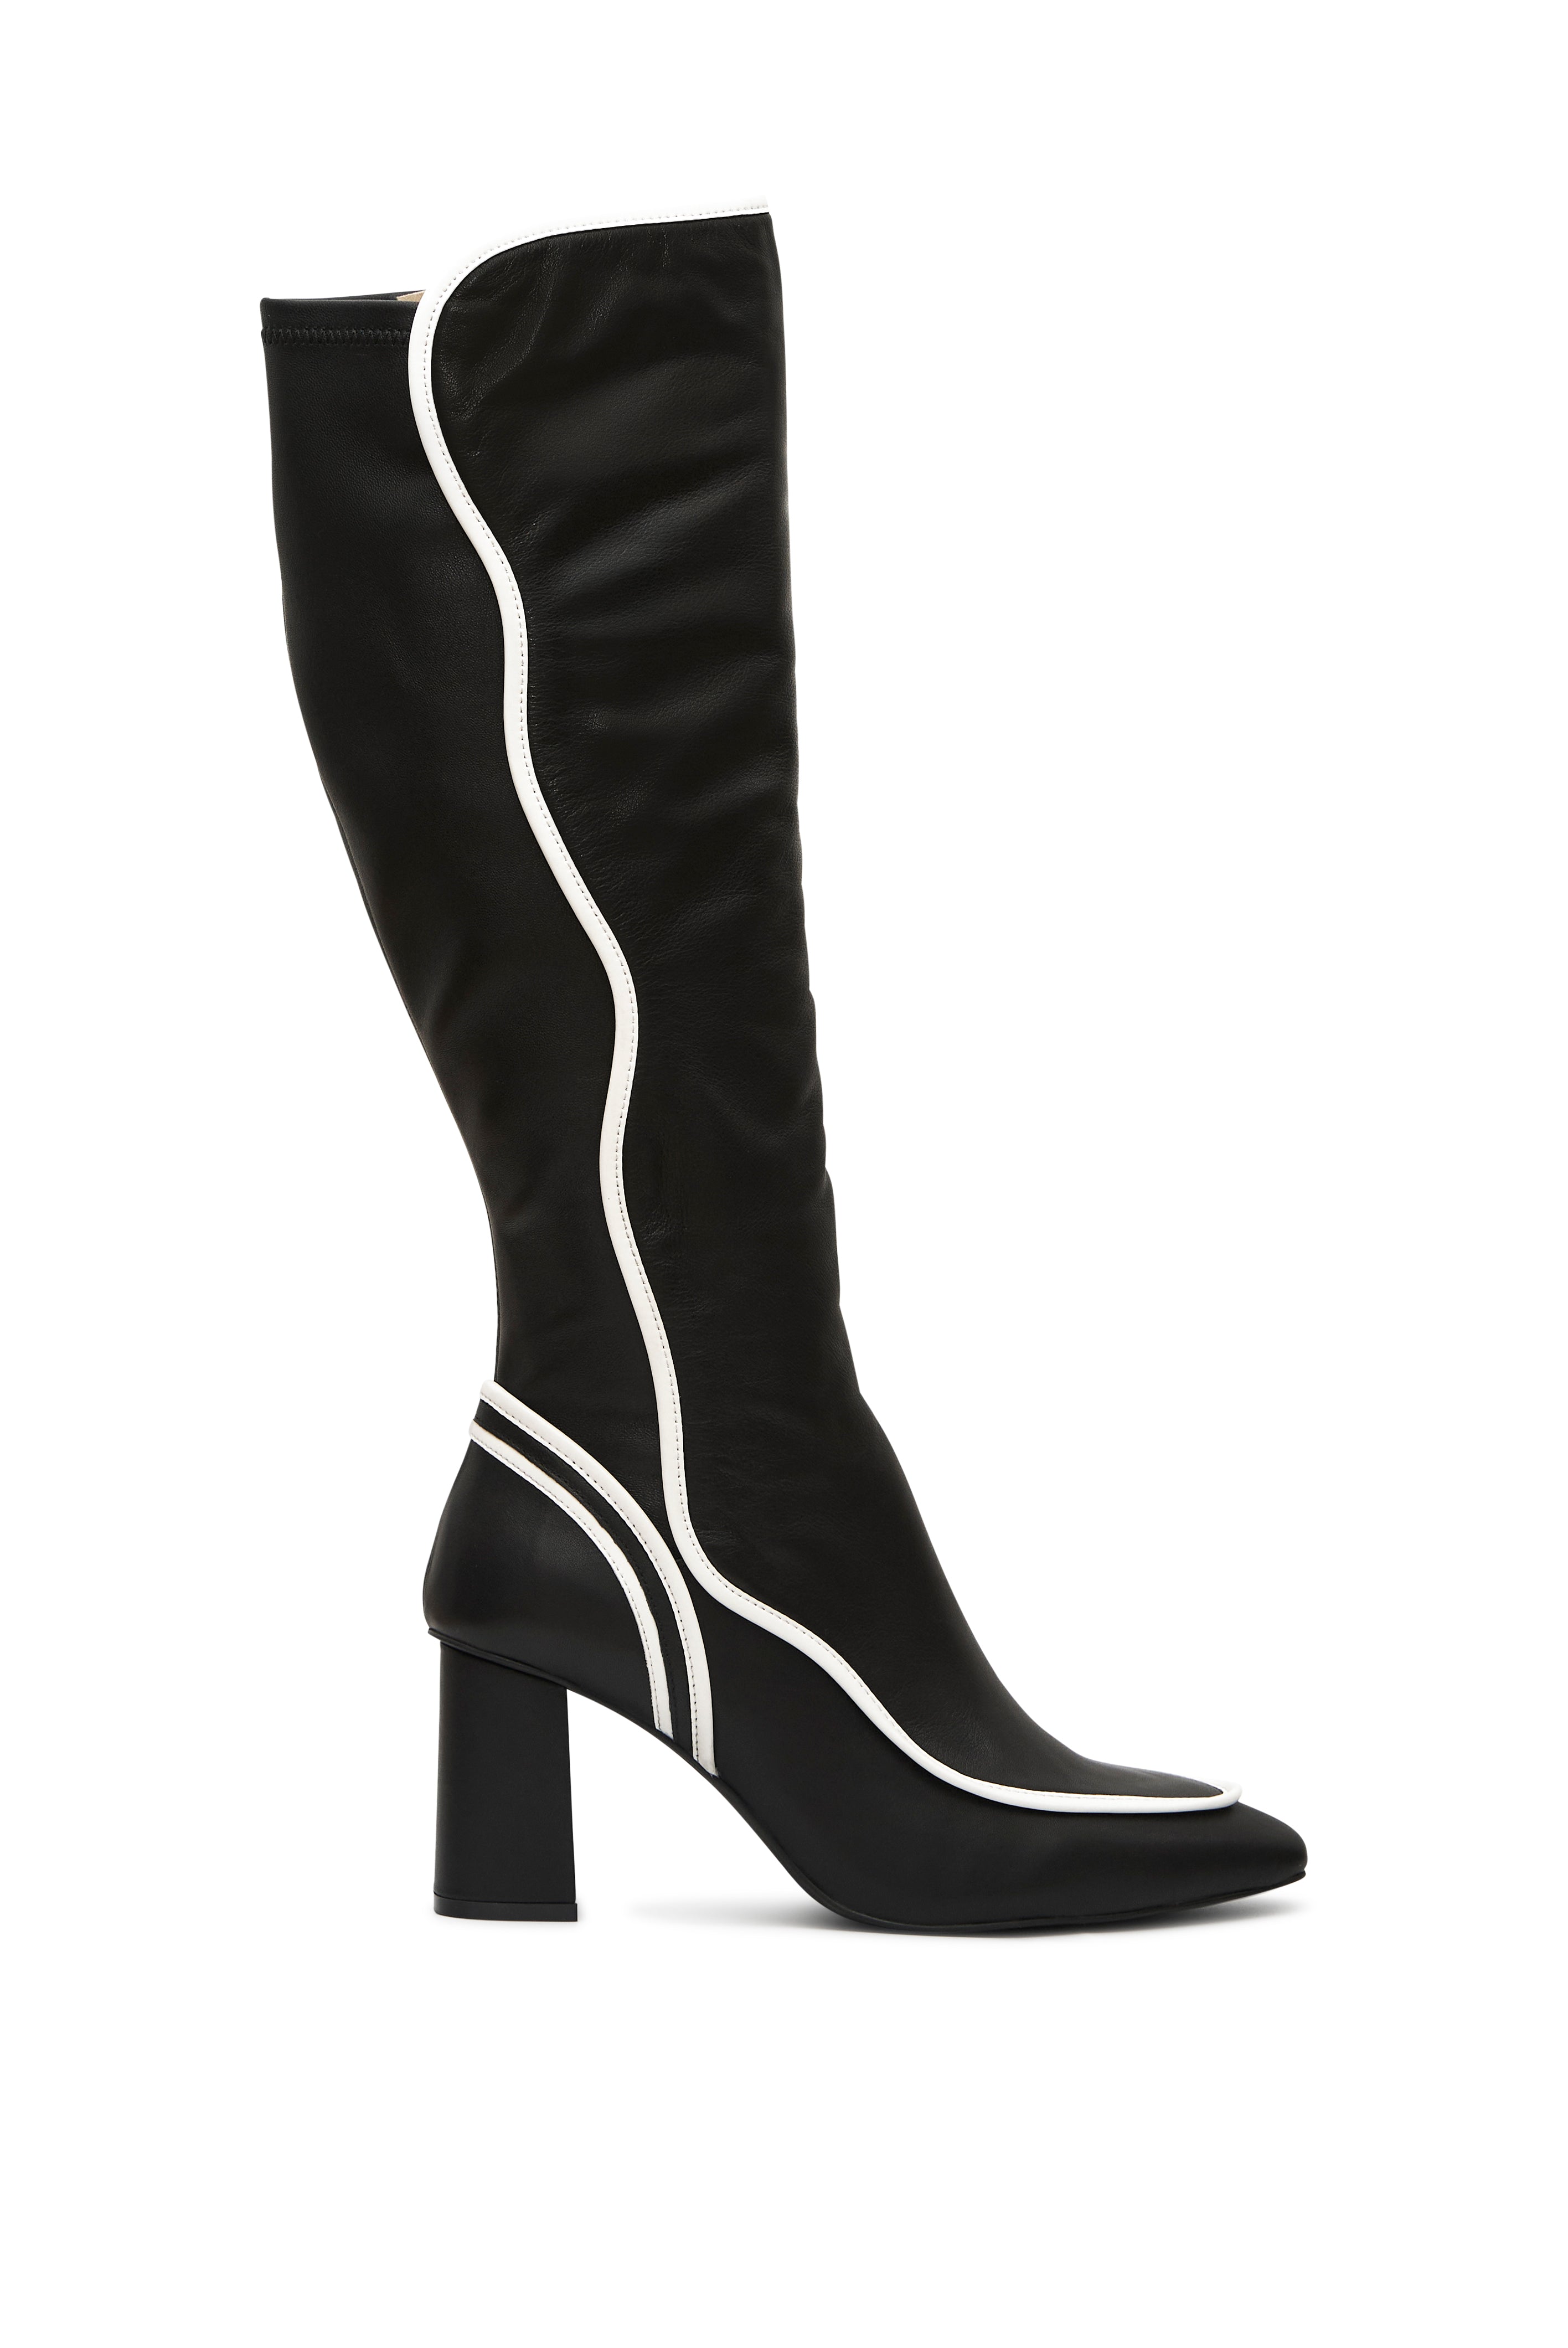 Vince Camuto Sewinny Extra Wide-Calf Over-the-Knee Boot